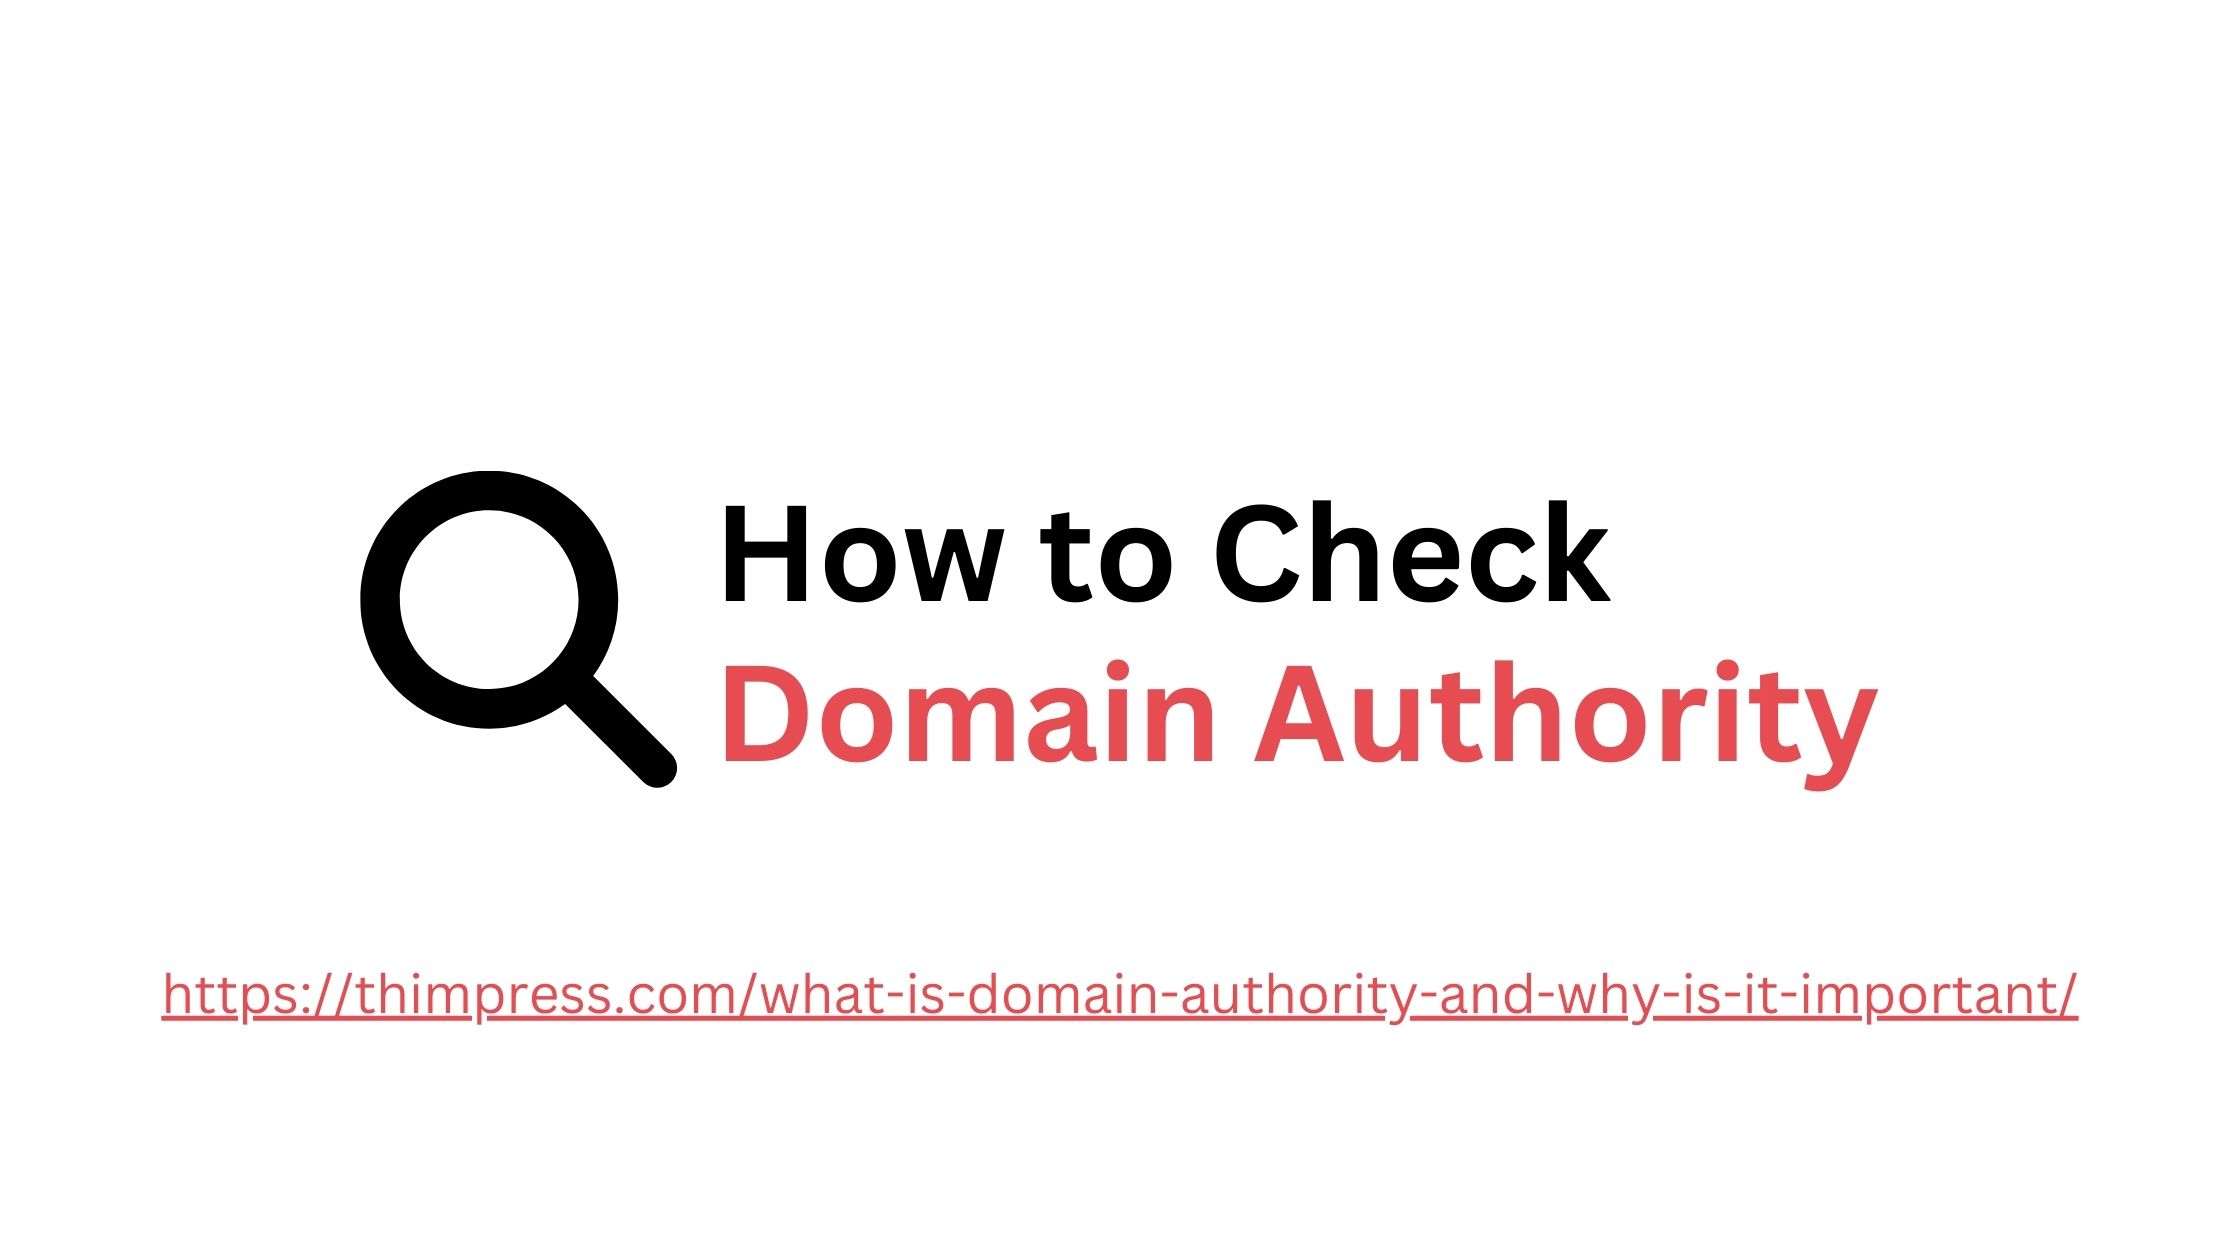 How to Check Domain Authority